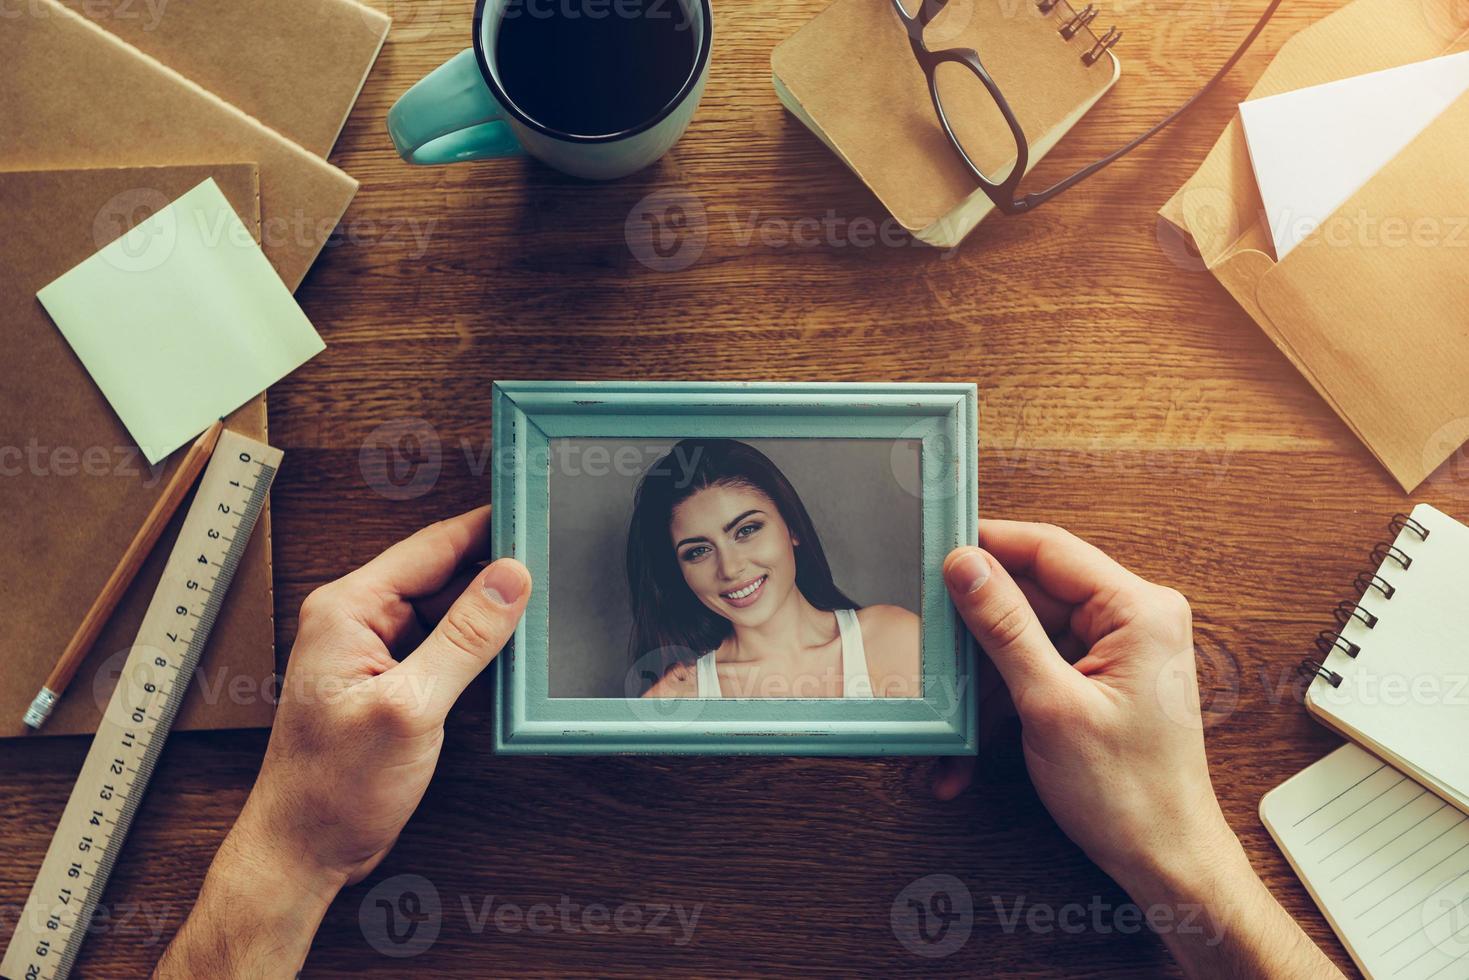 My wife is my inspiration. Close-up top view of man holding photograph of beautiful young woman over wooden desk with different chancellery stuff laying around photo